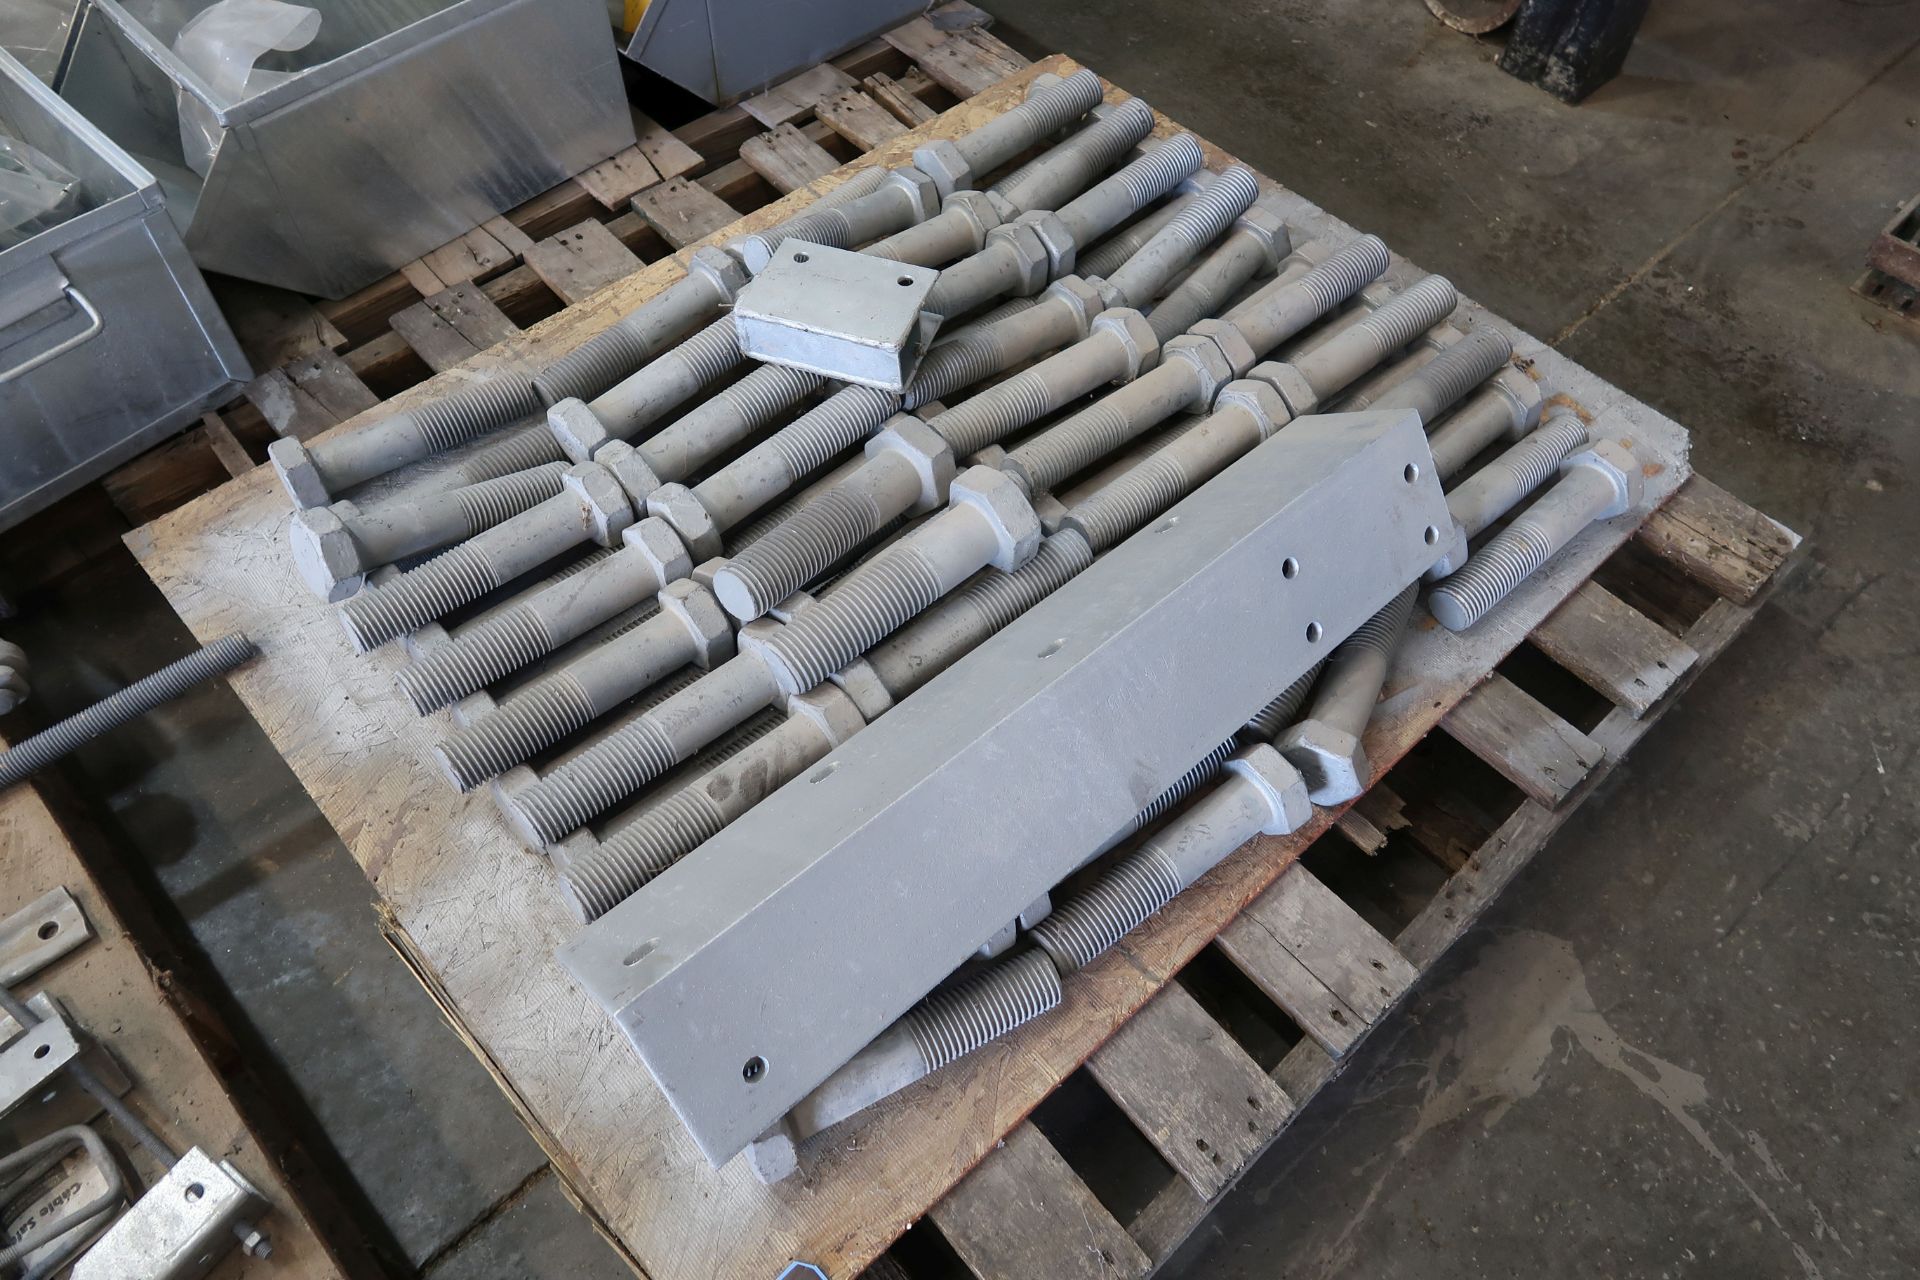 SKID MISCELLANEOUS GALVANIZED TOWER COMPONENTS AND HARDWARE